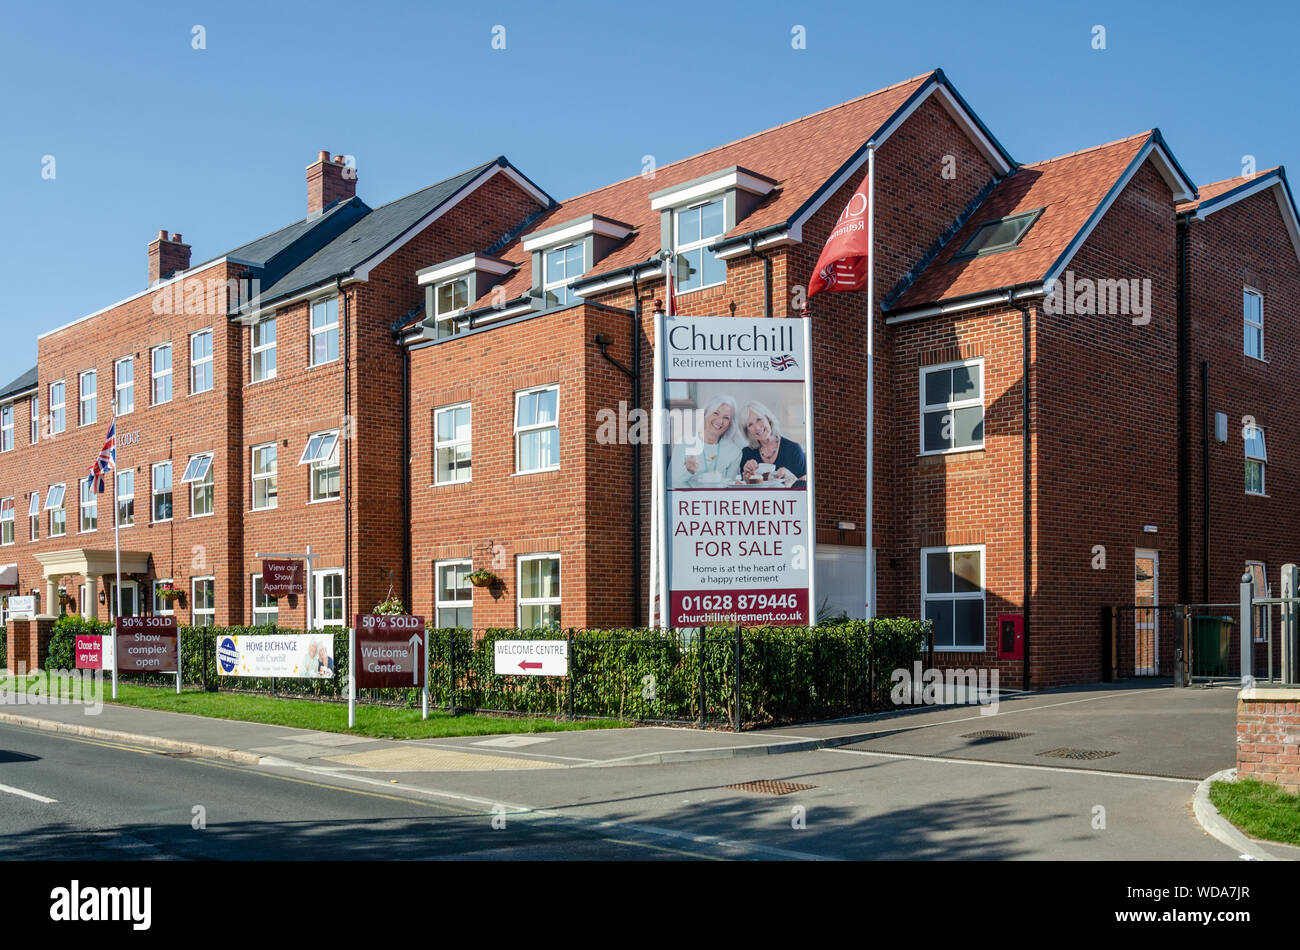 Newly built retirement apartments for sale in Marlow, Buckinghamshire, UK Stock Photo